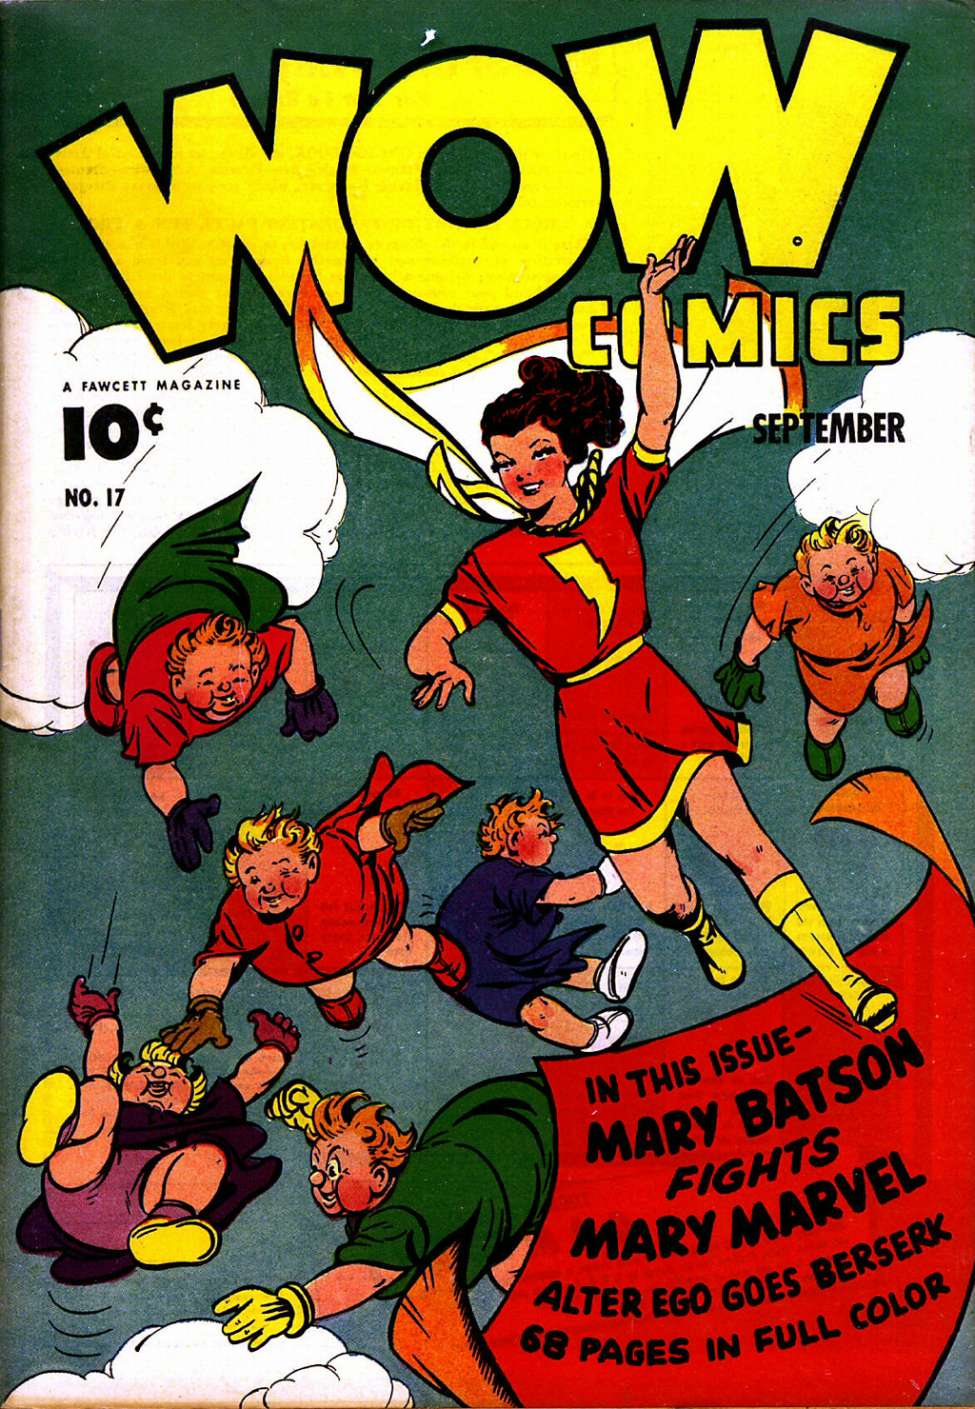 Comic Book Cover For Wow Comics 17 (alt) - Version 2